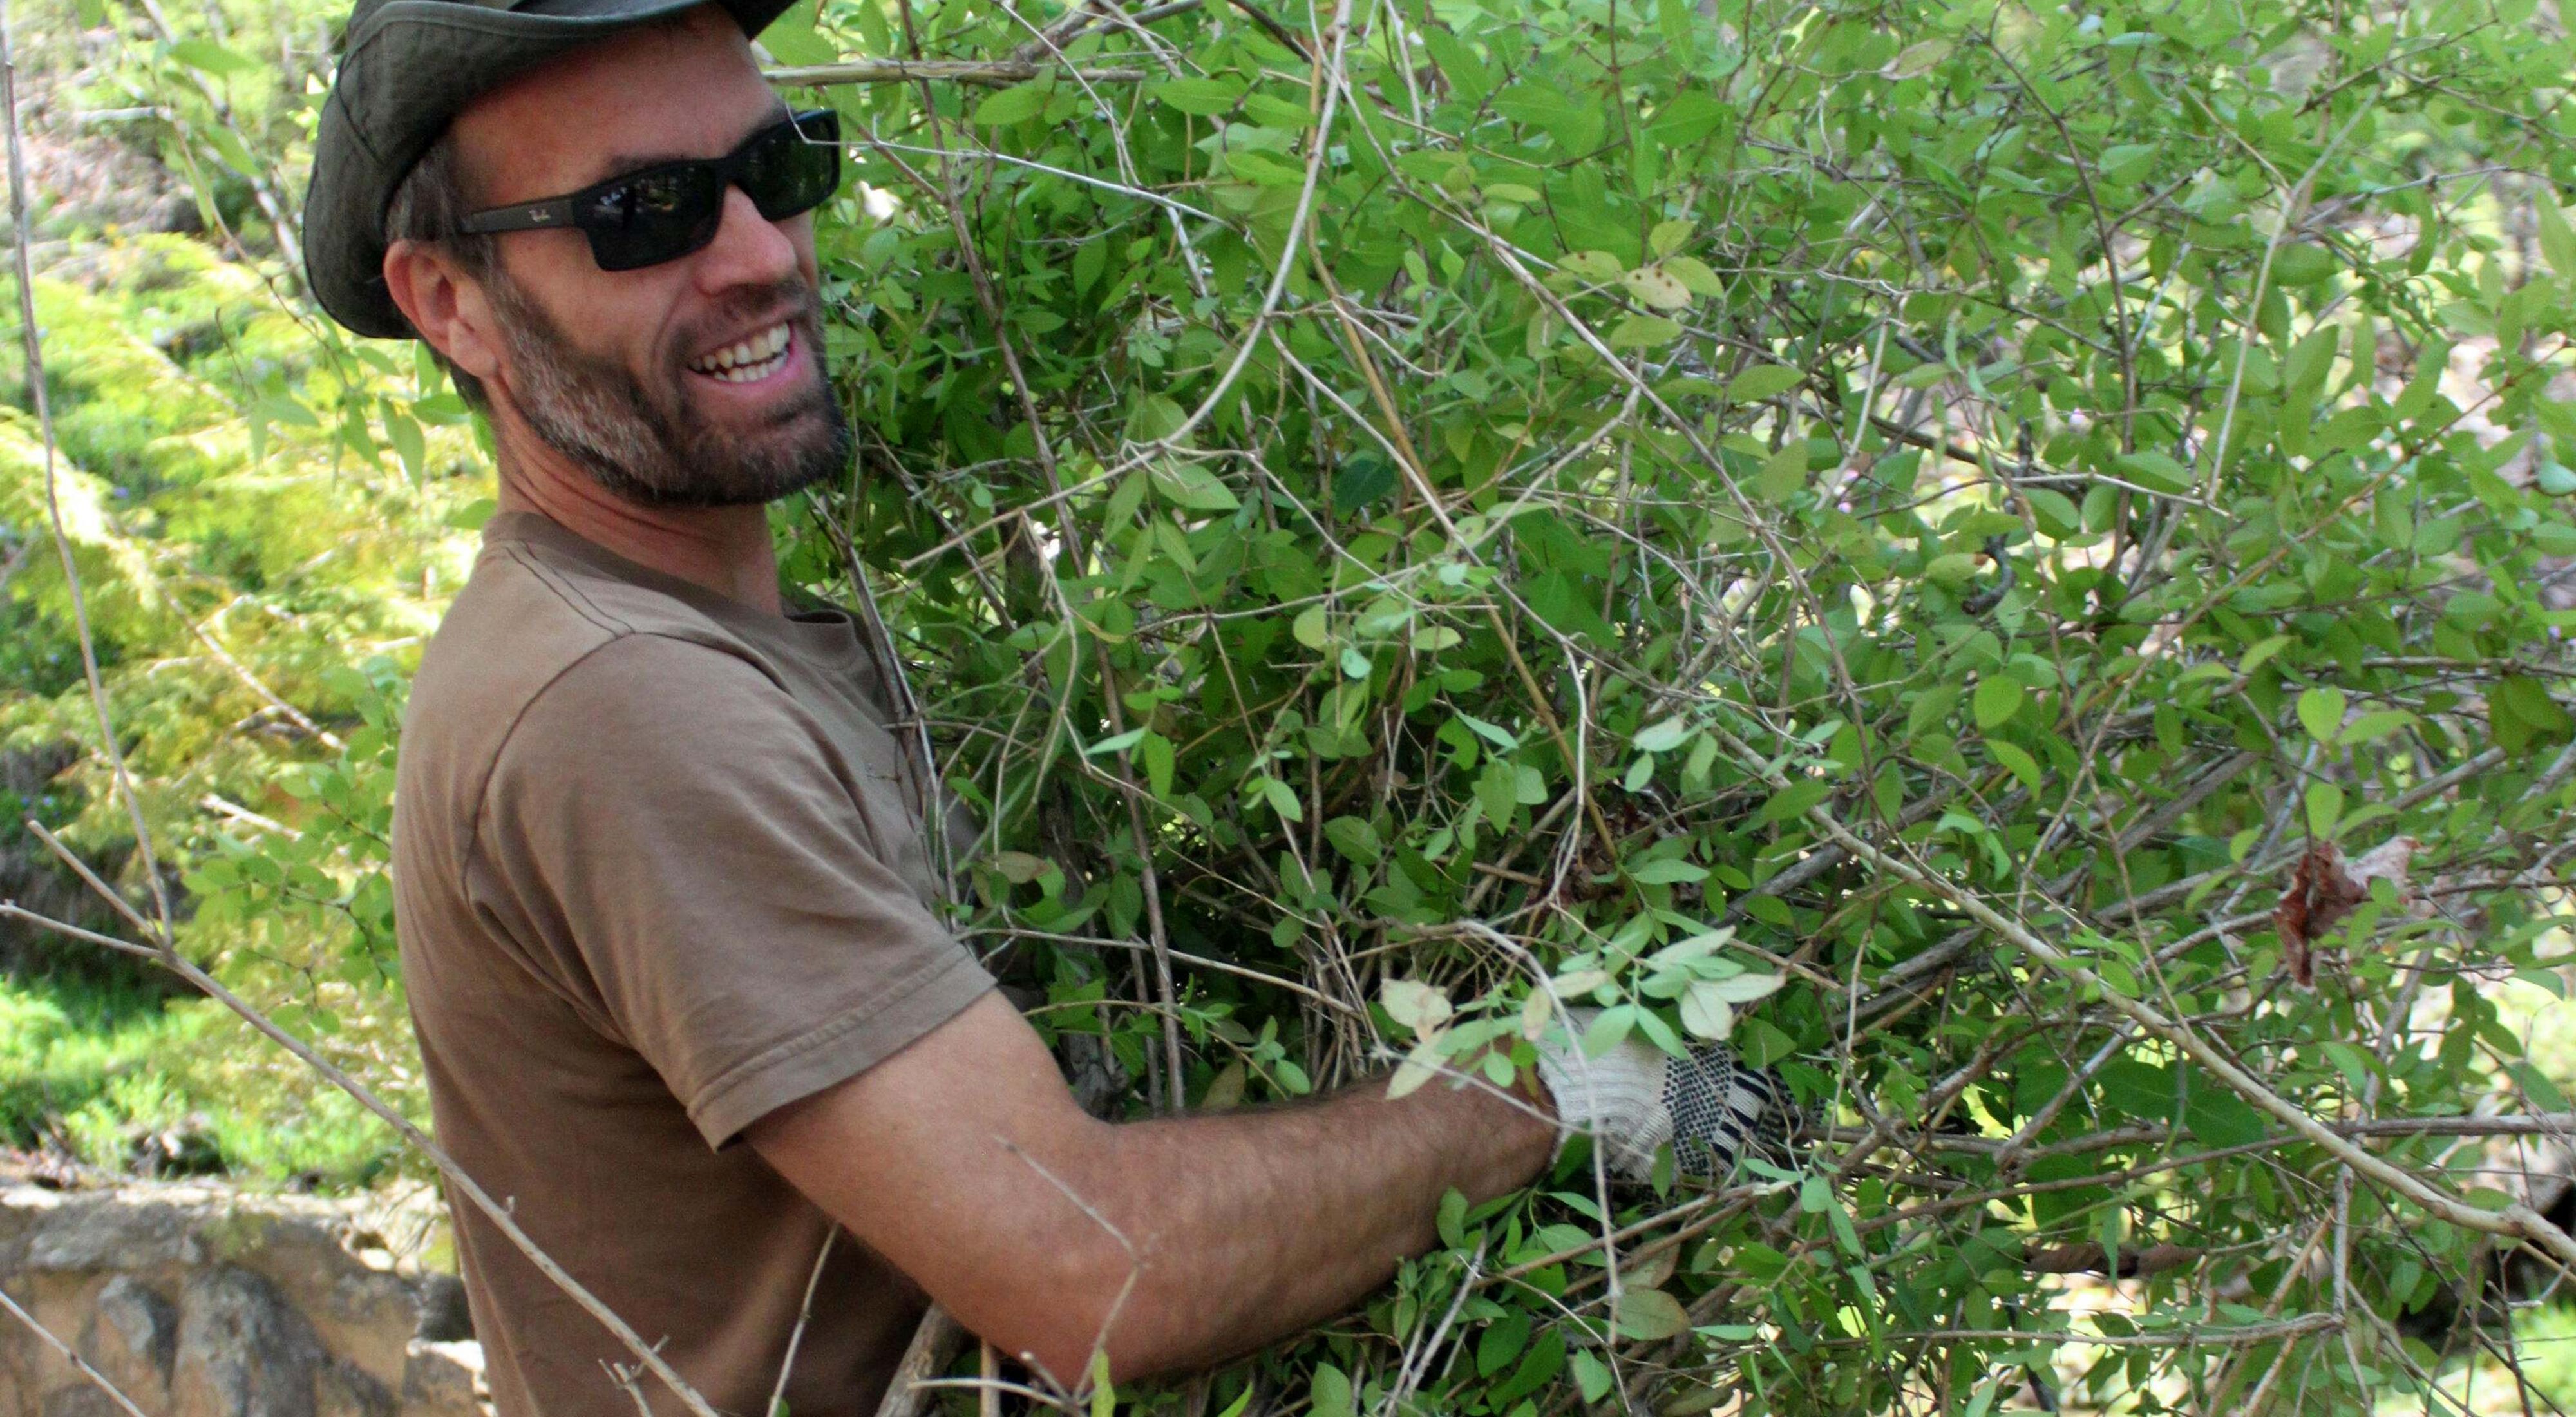 A smiling man carries an armful of cut branches and brush during a volunteer preserve workday.